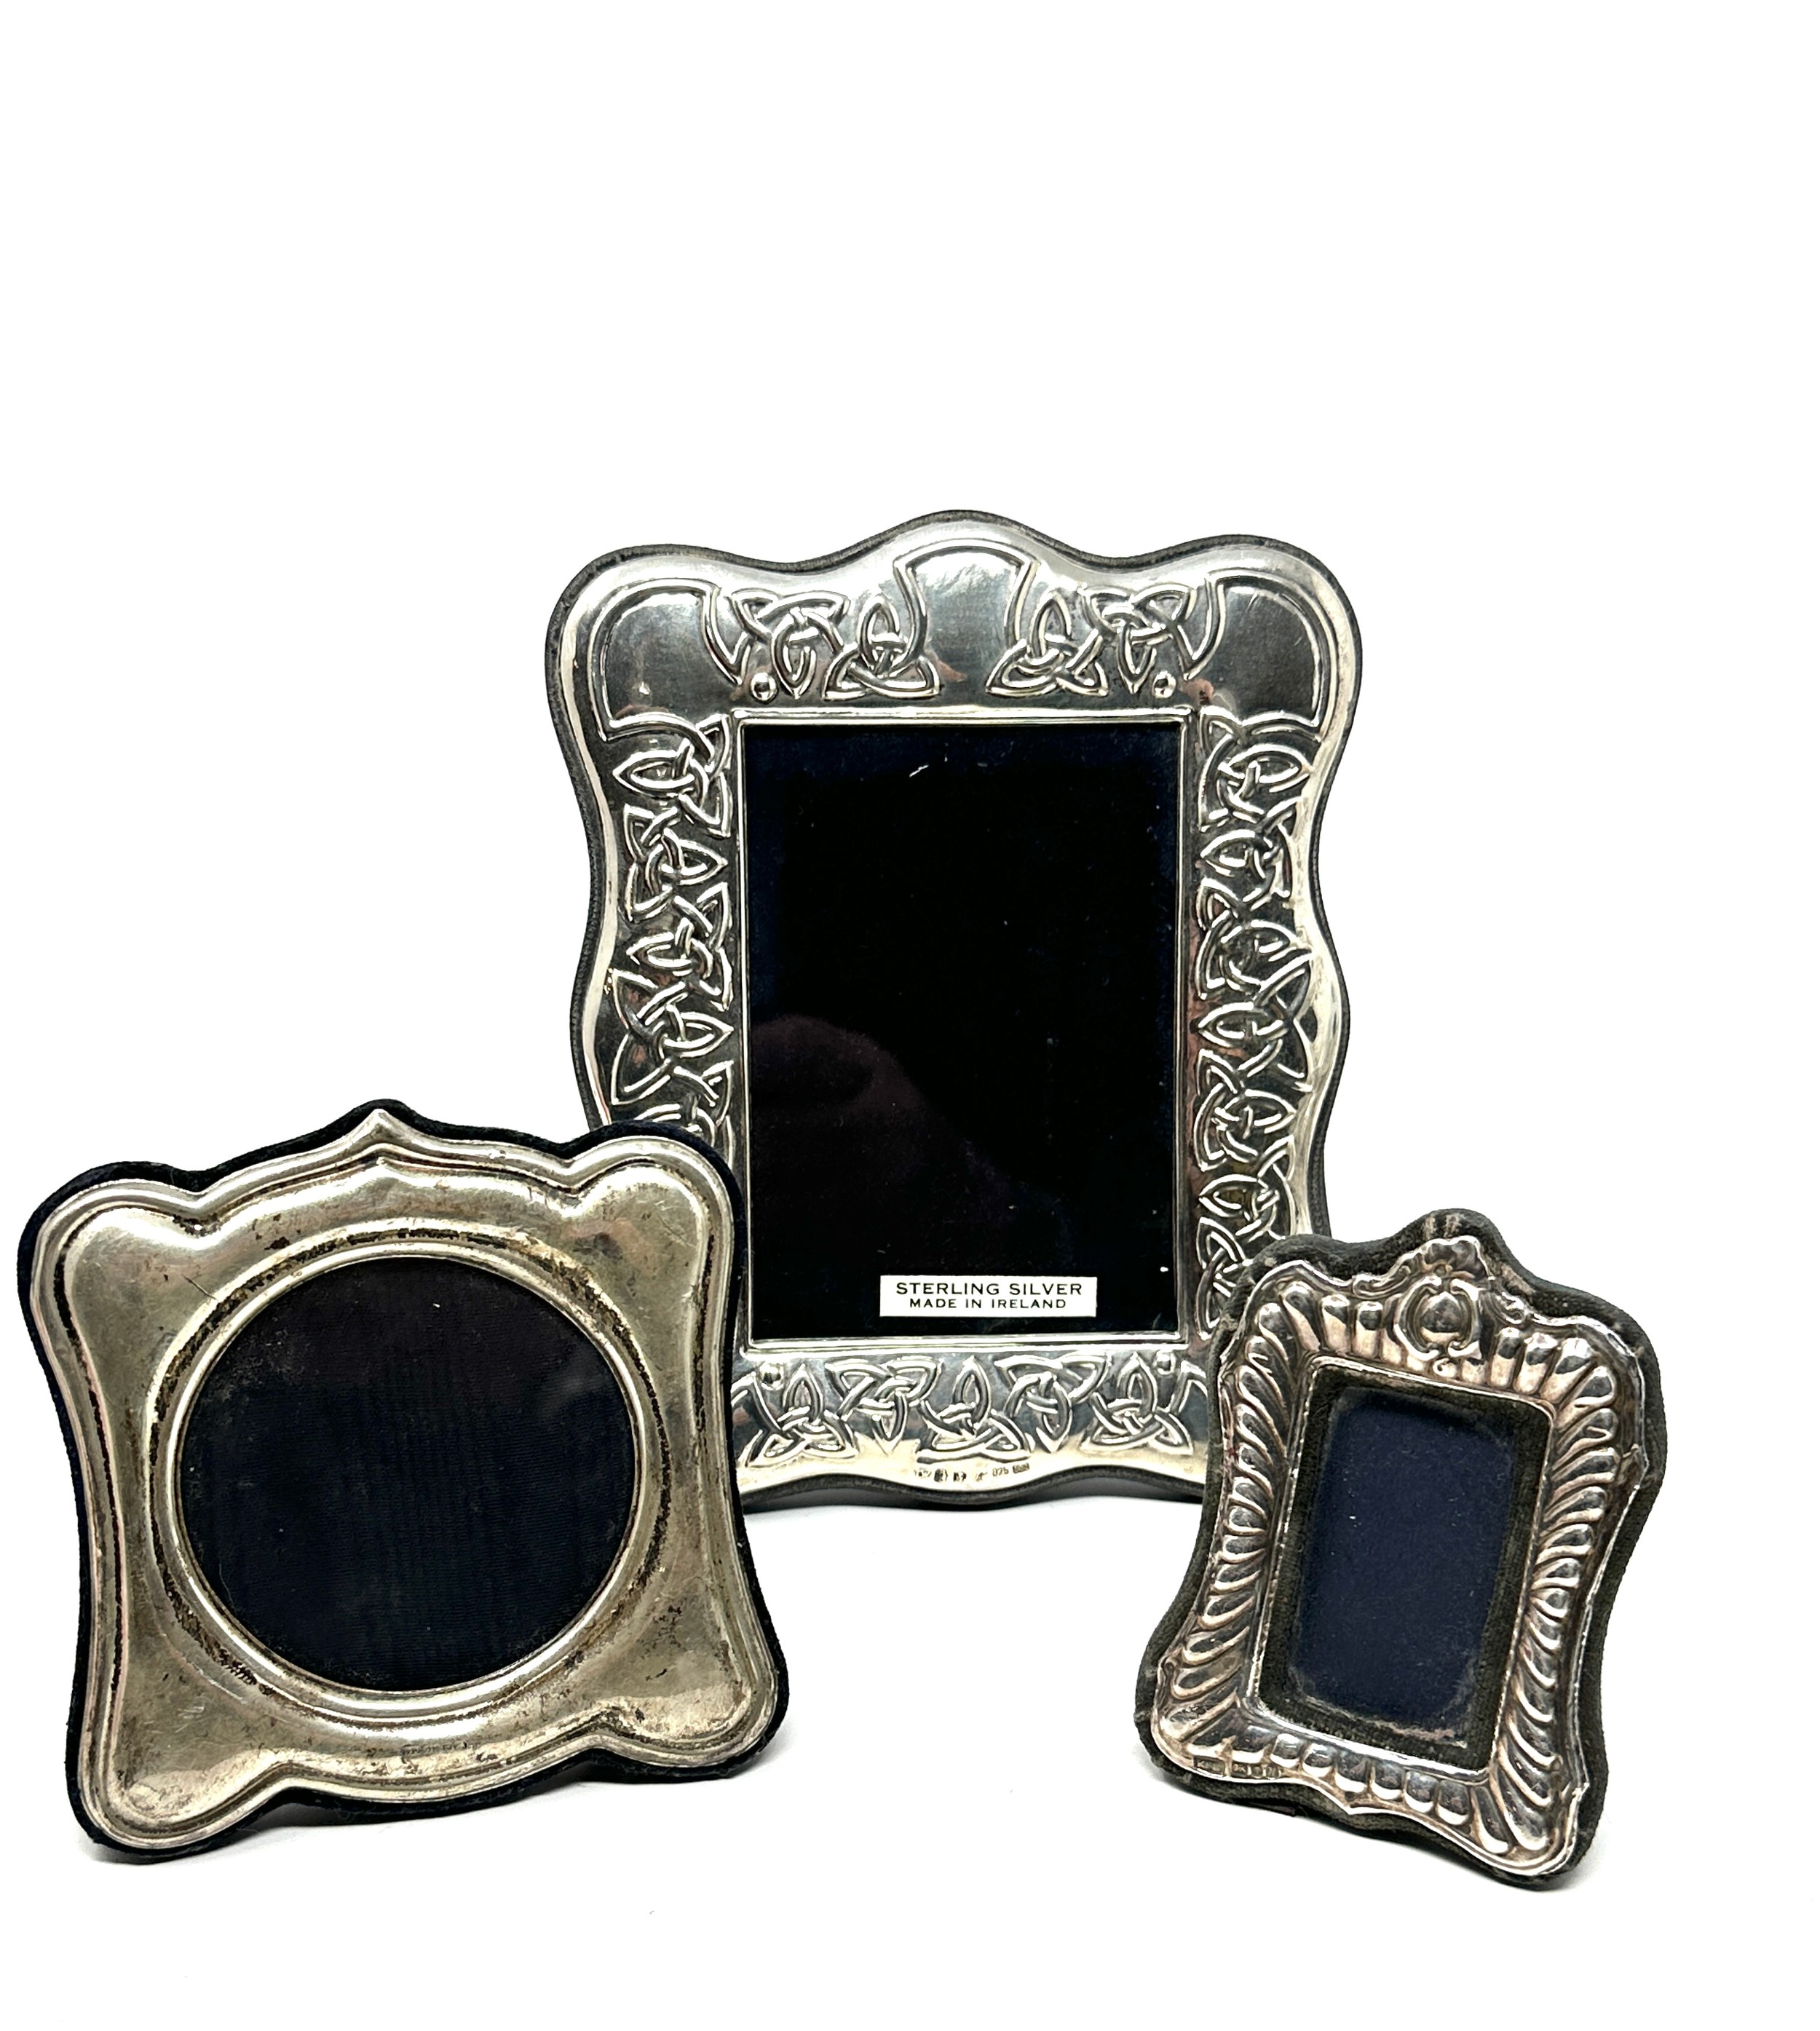 3 silver picture frames largest measures approx 15cm by 12cm